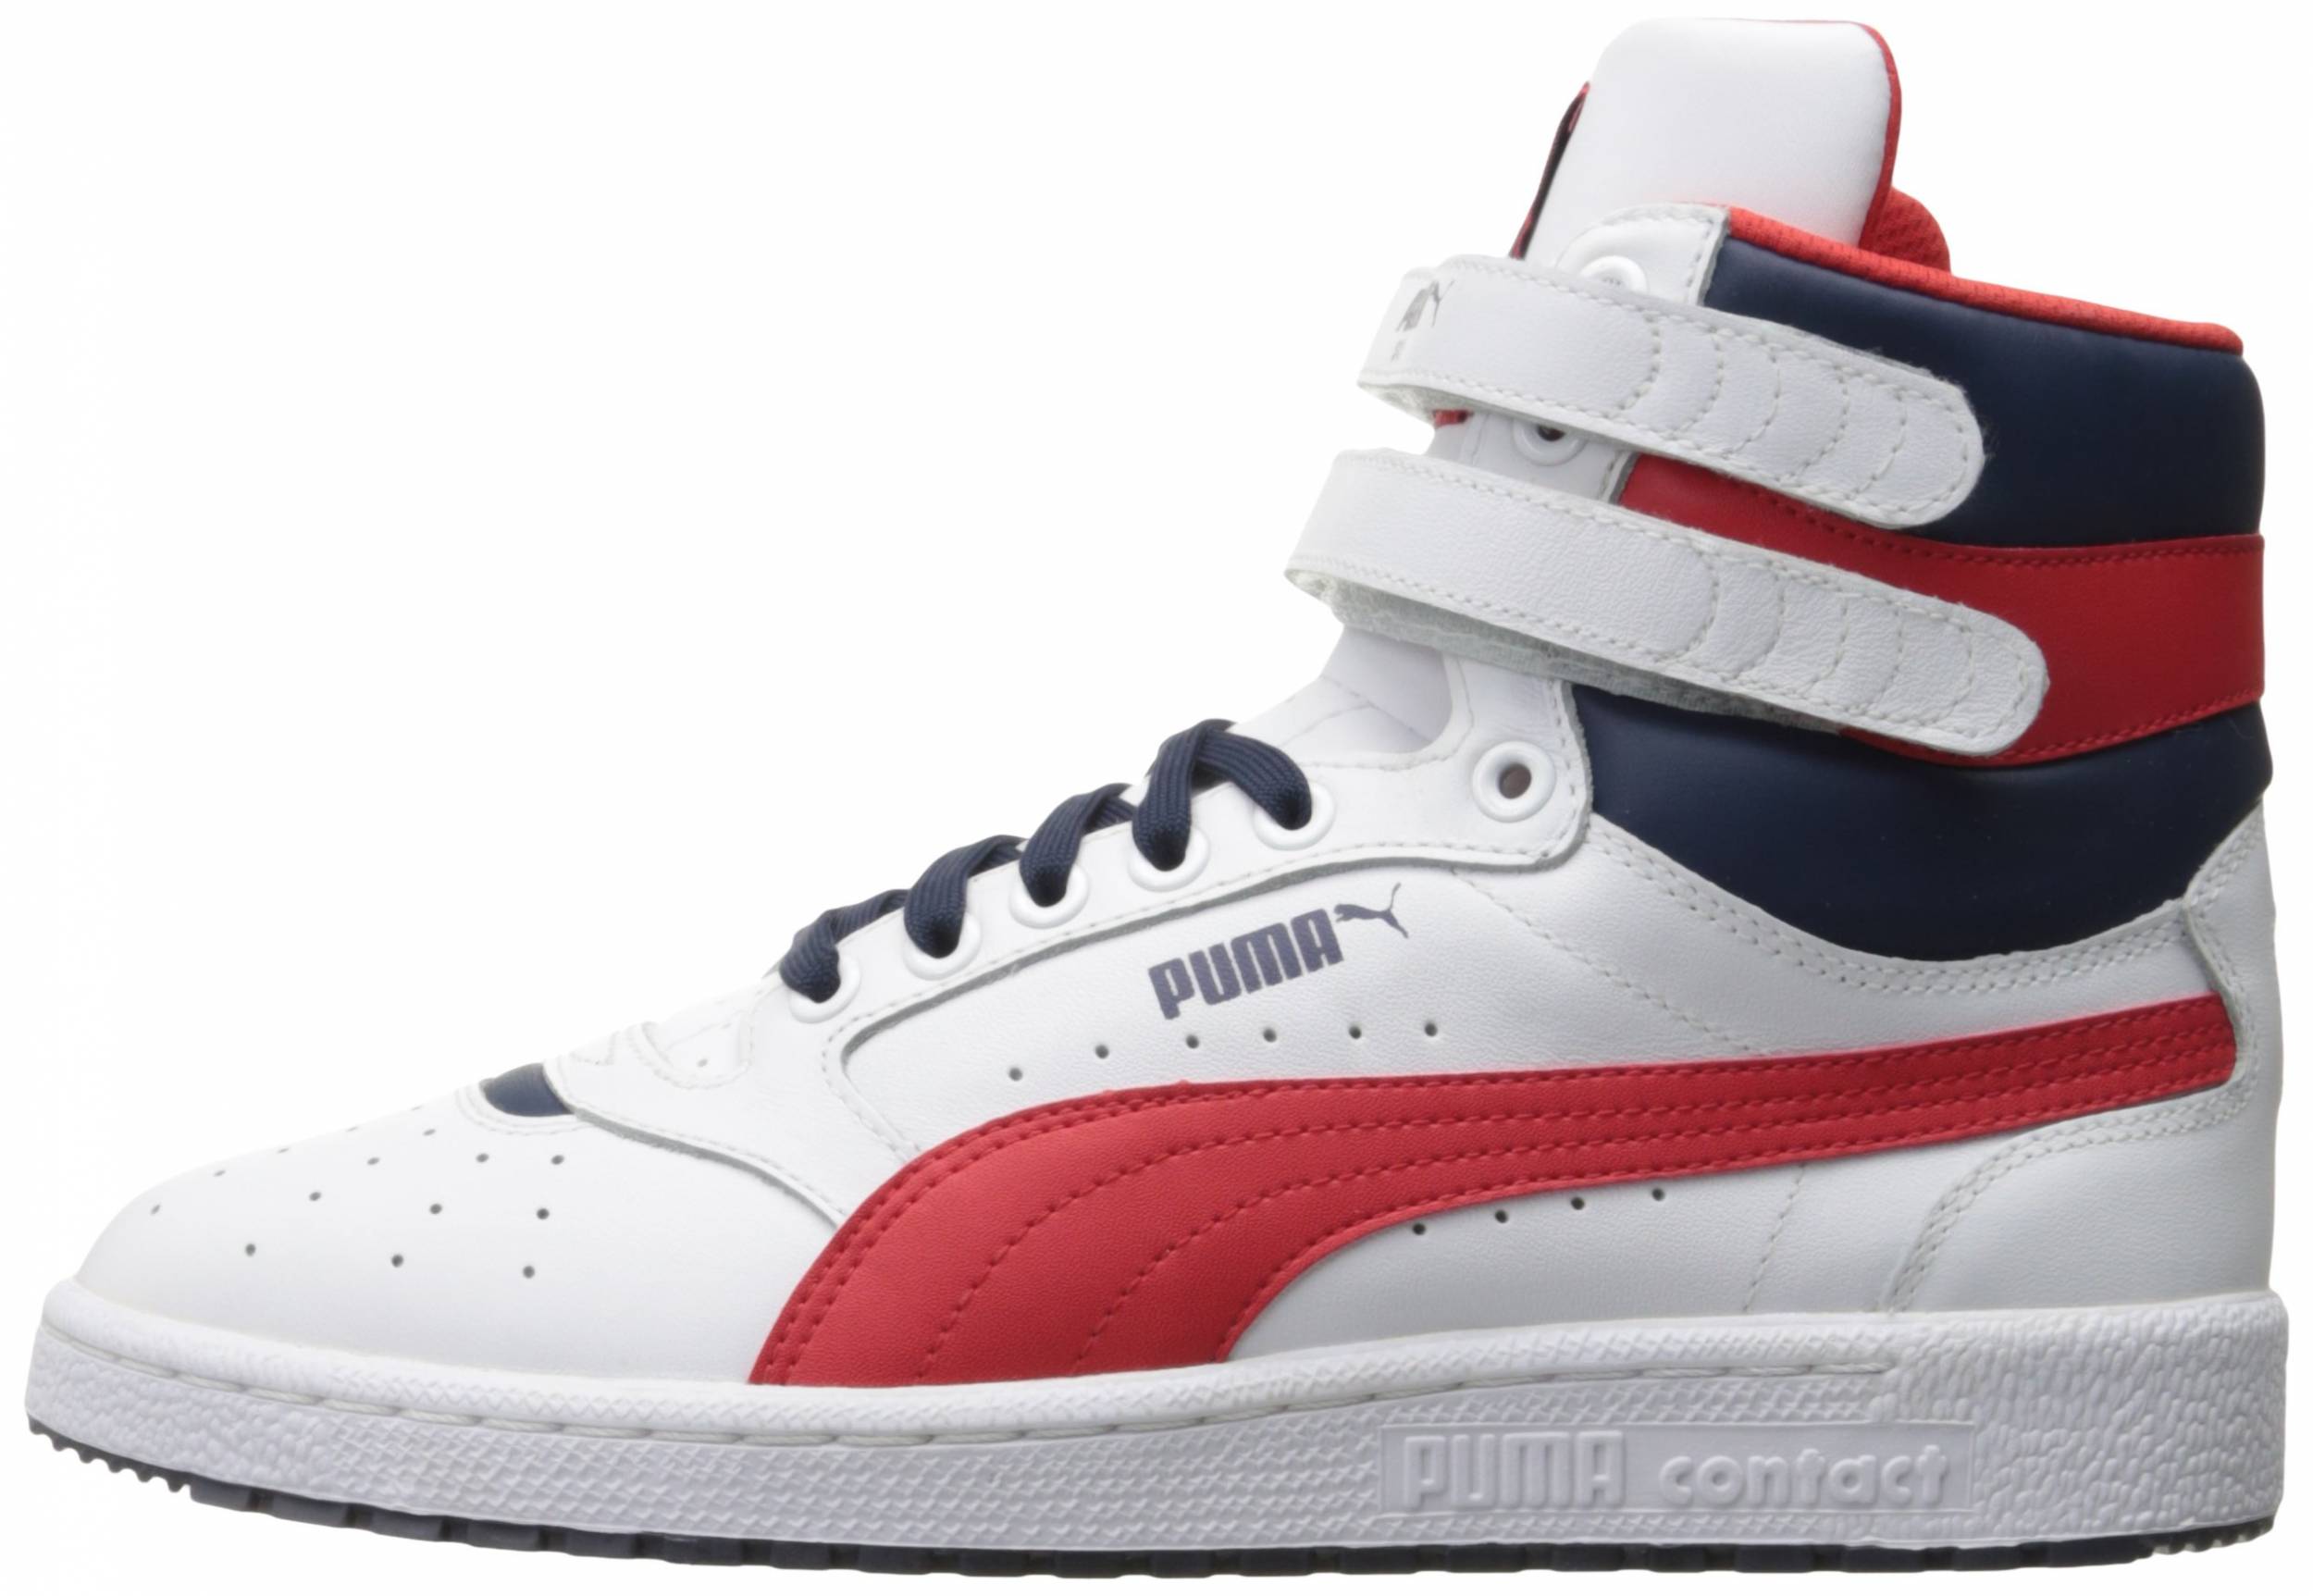 puma red high top sneakers